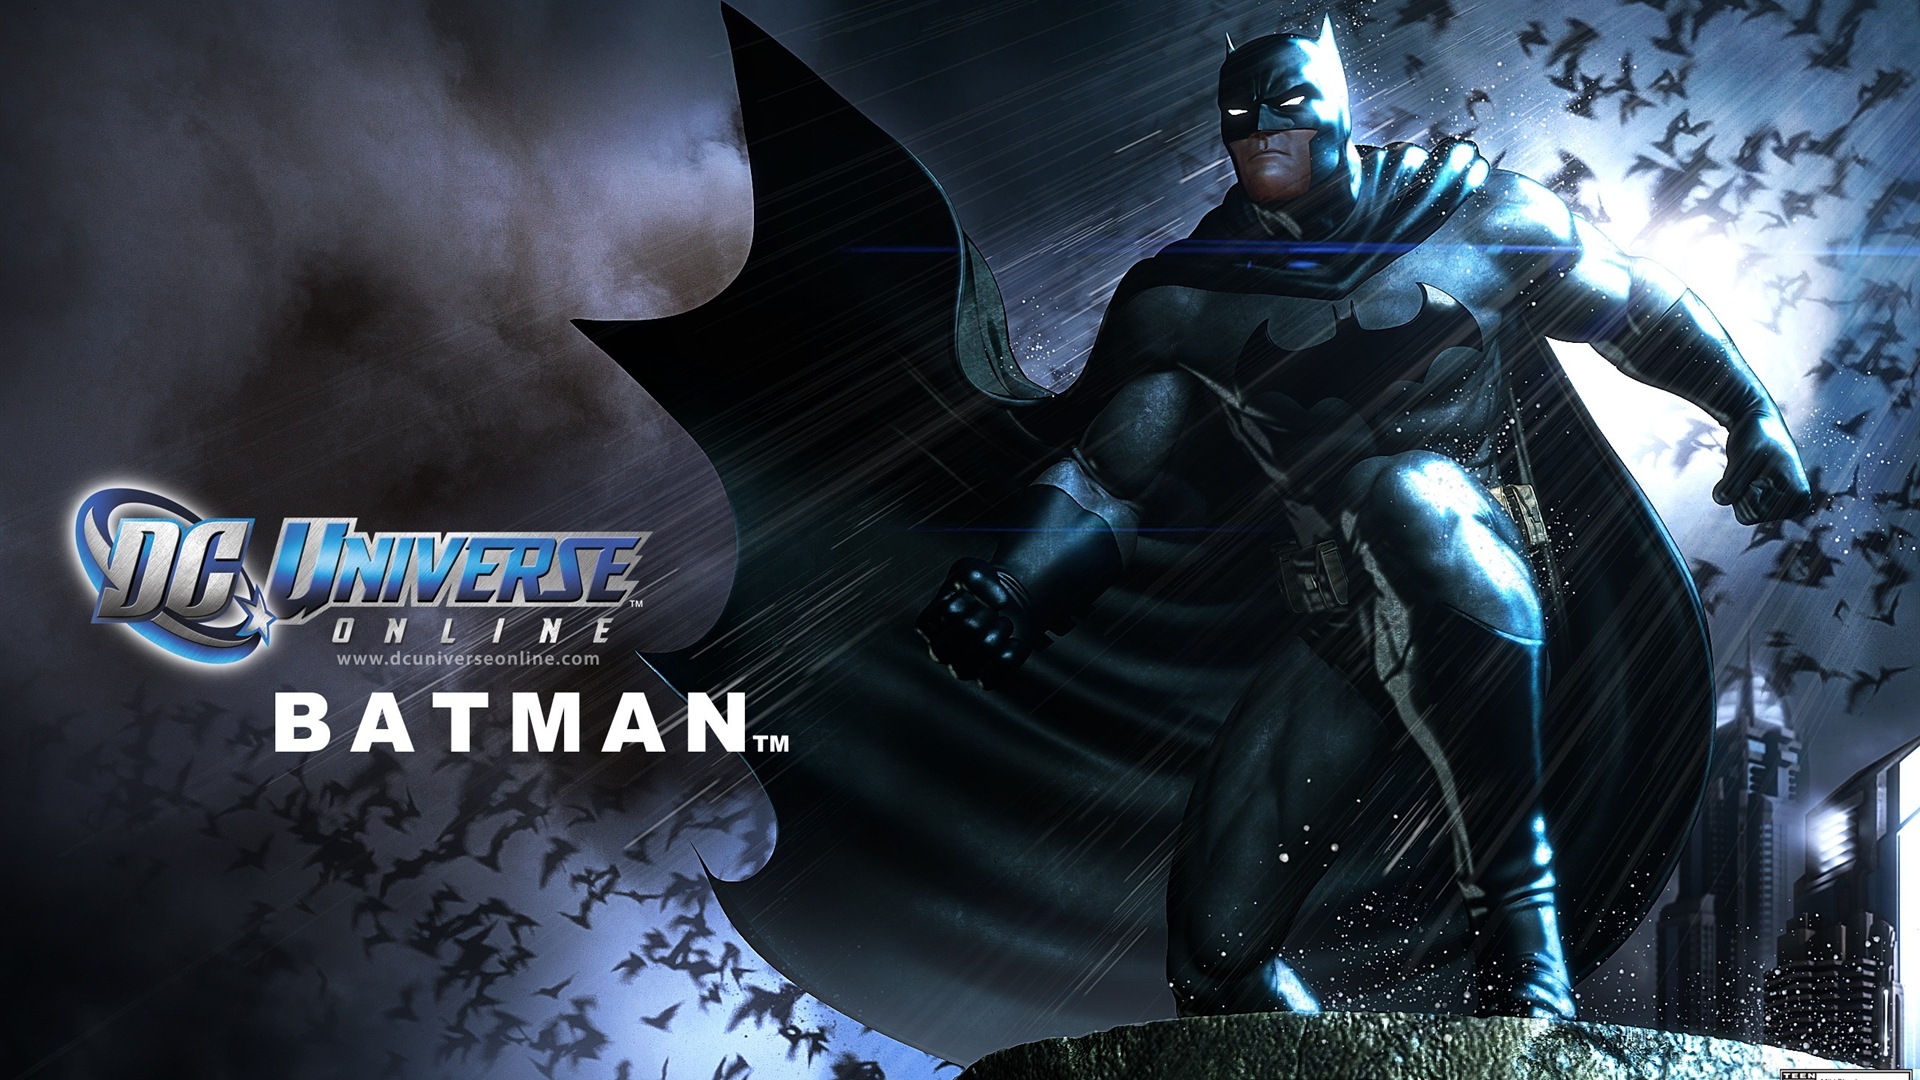 DC Universe Online HD game wallpapers #18 - 1920x1080